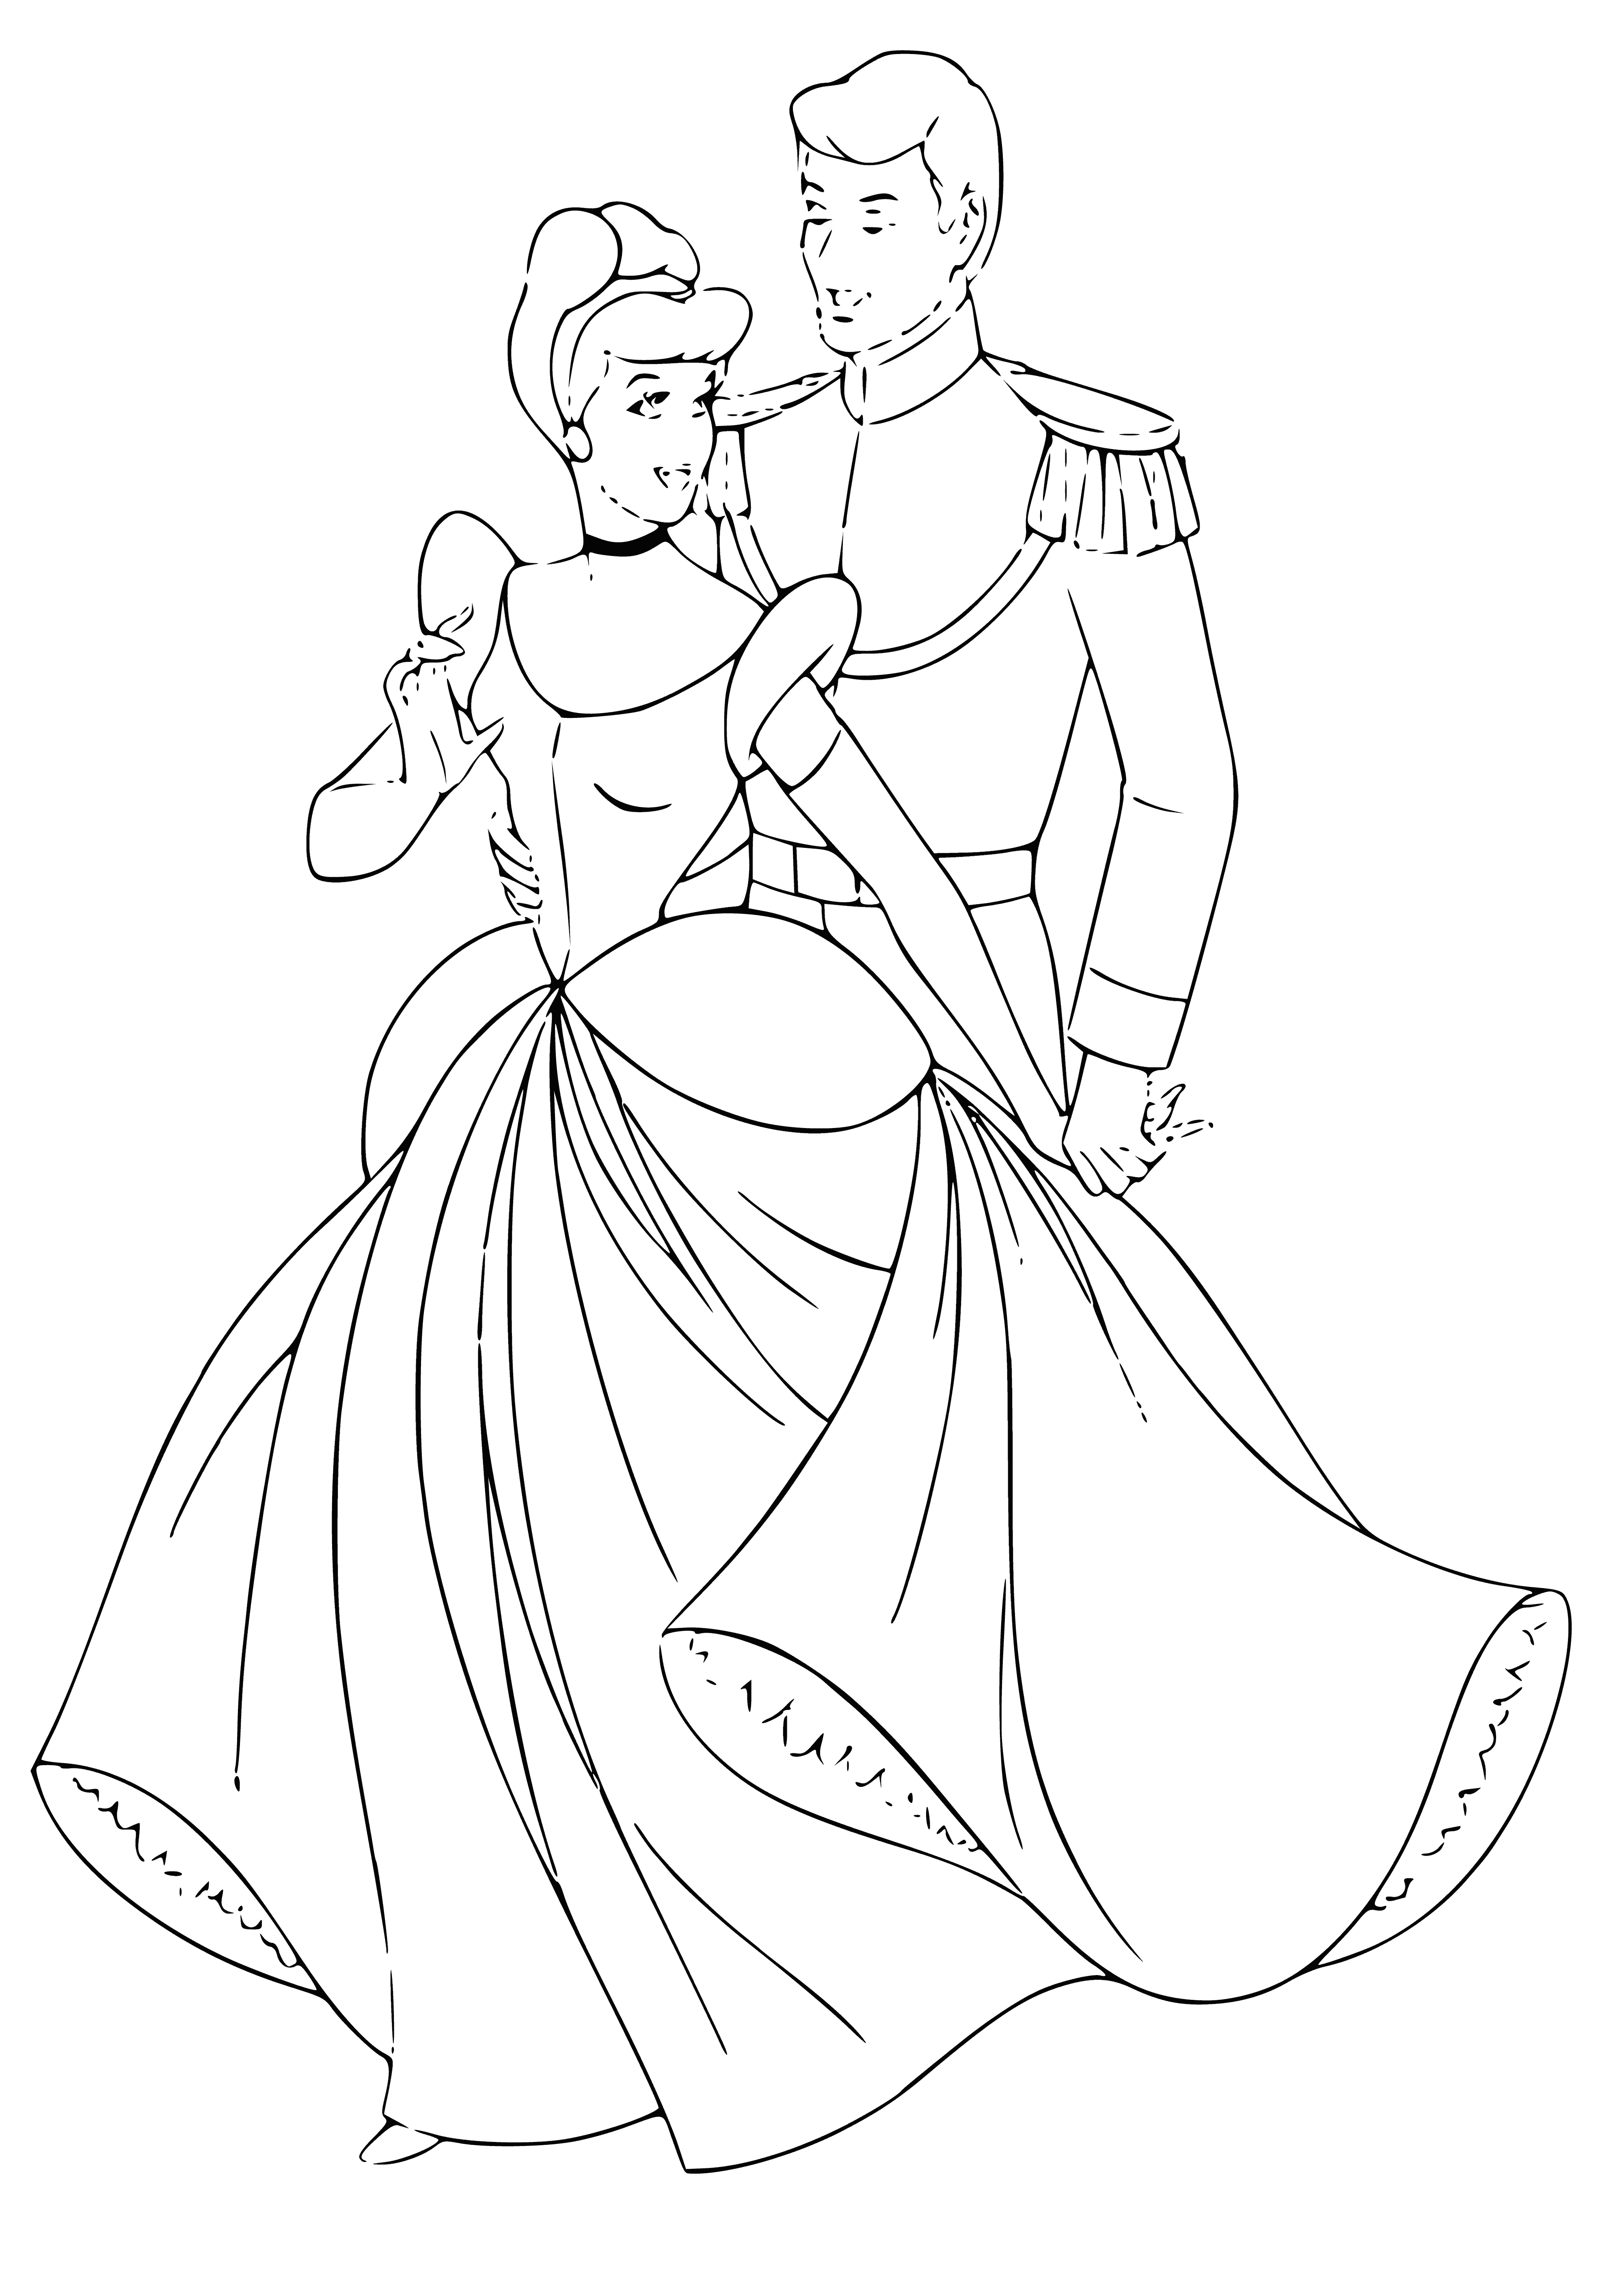 coloring page: A young, mistreated girl is helped by her fairy godmother and meets a prince at a ball. Through a glass slipper, they find love and live happily ever after.